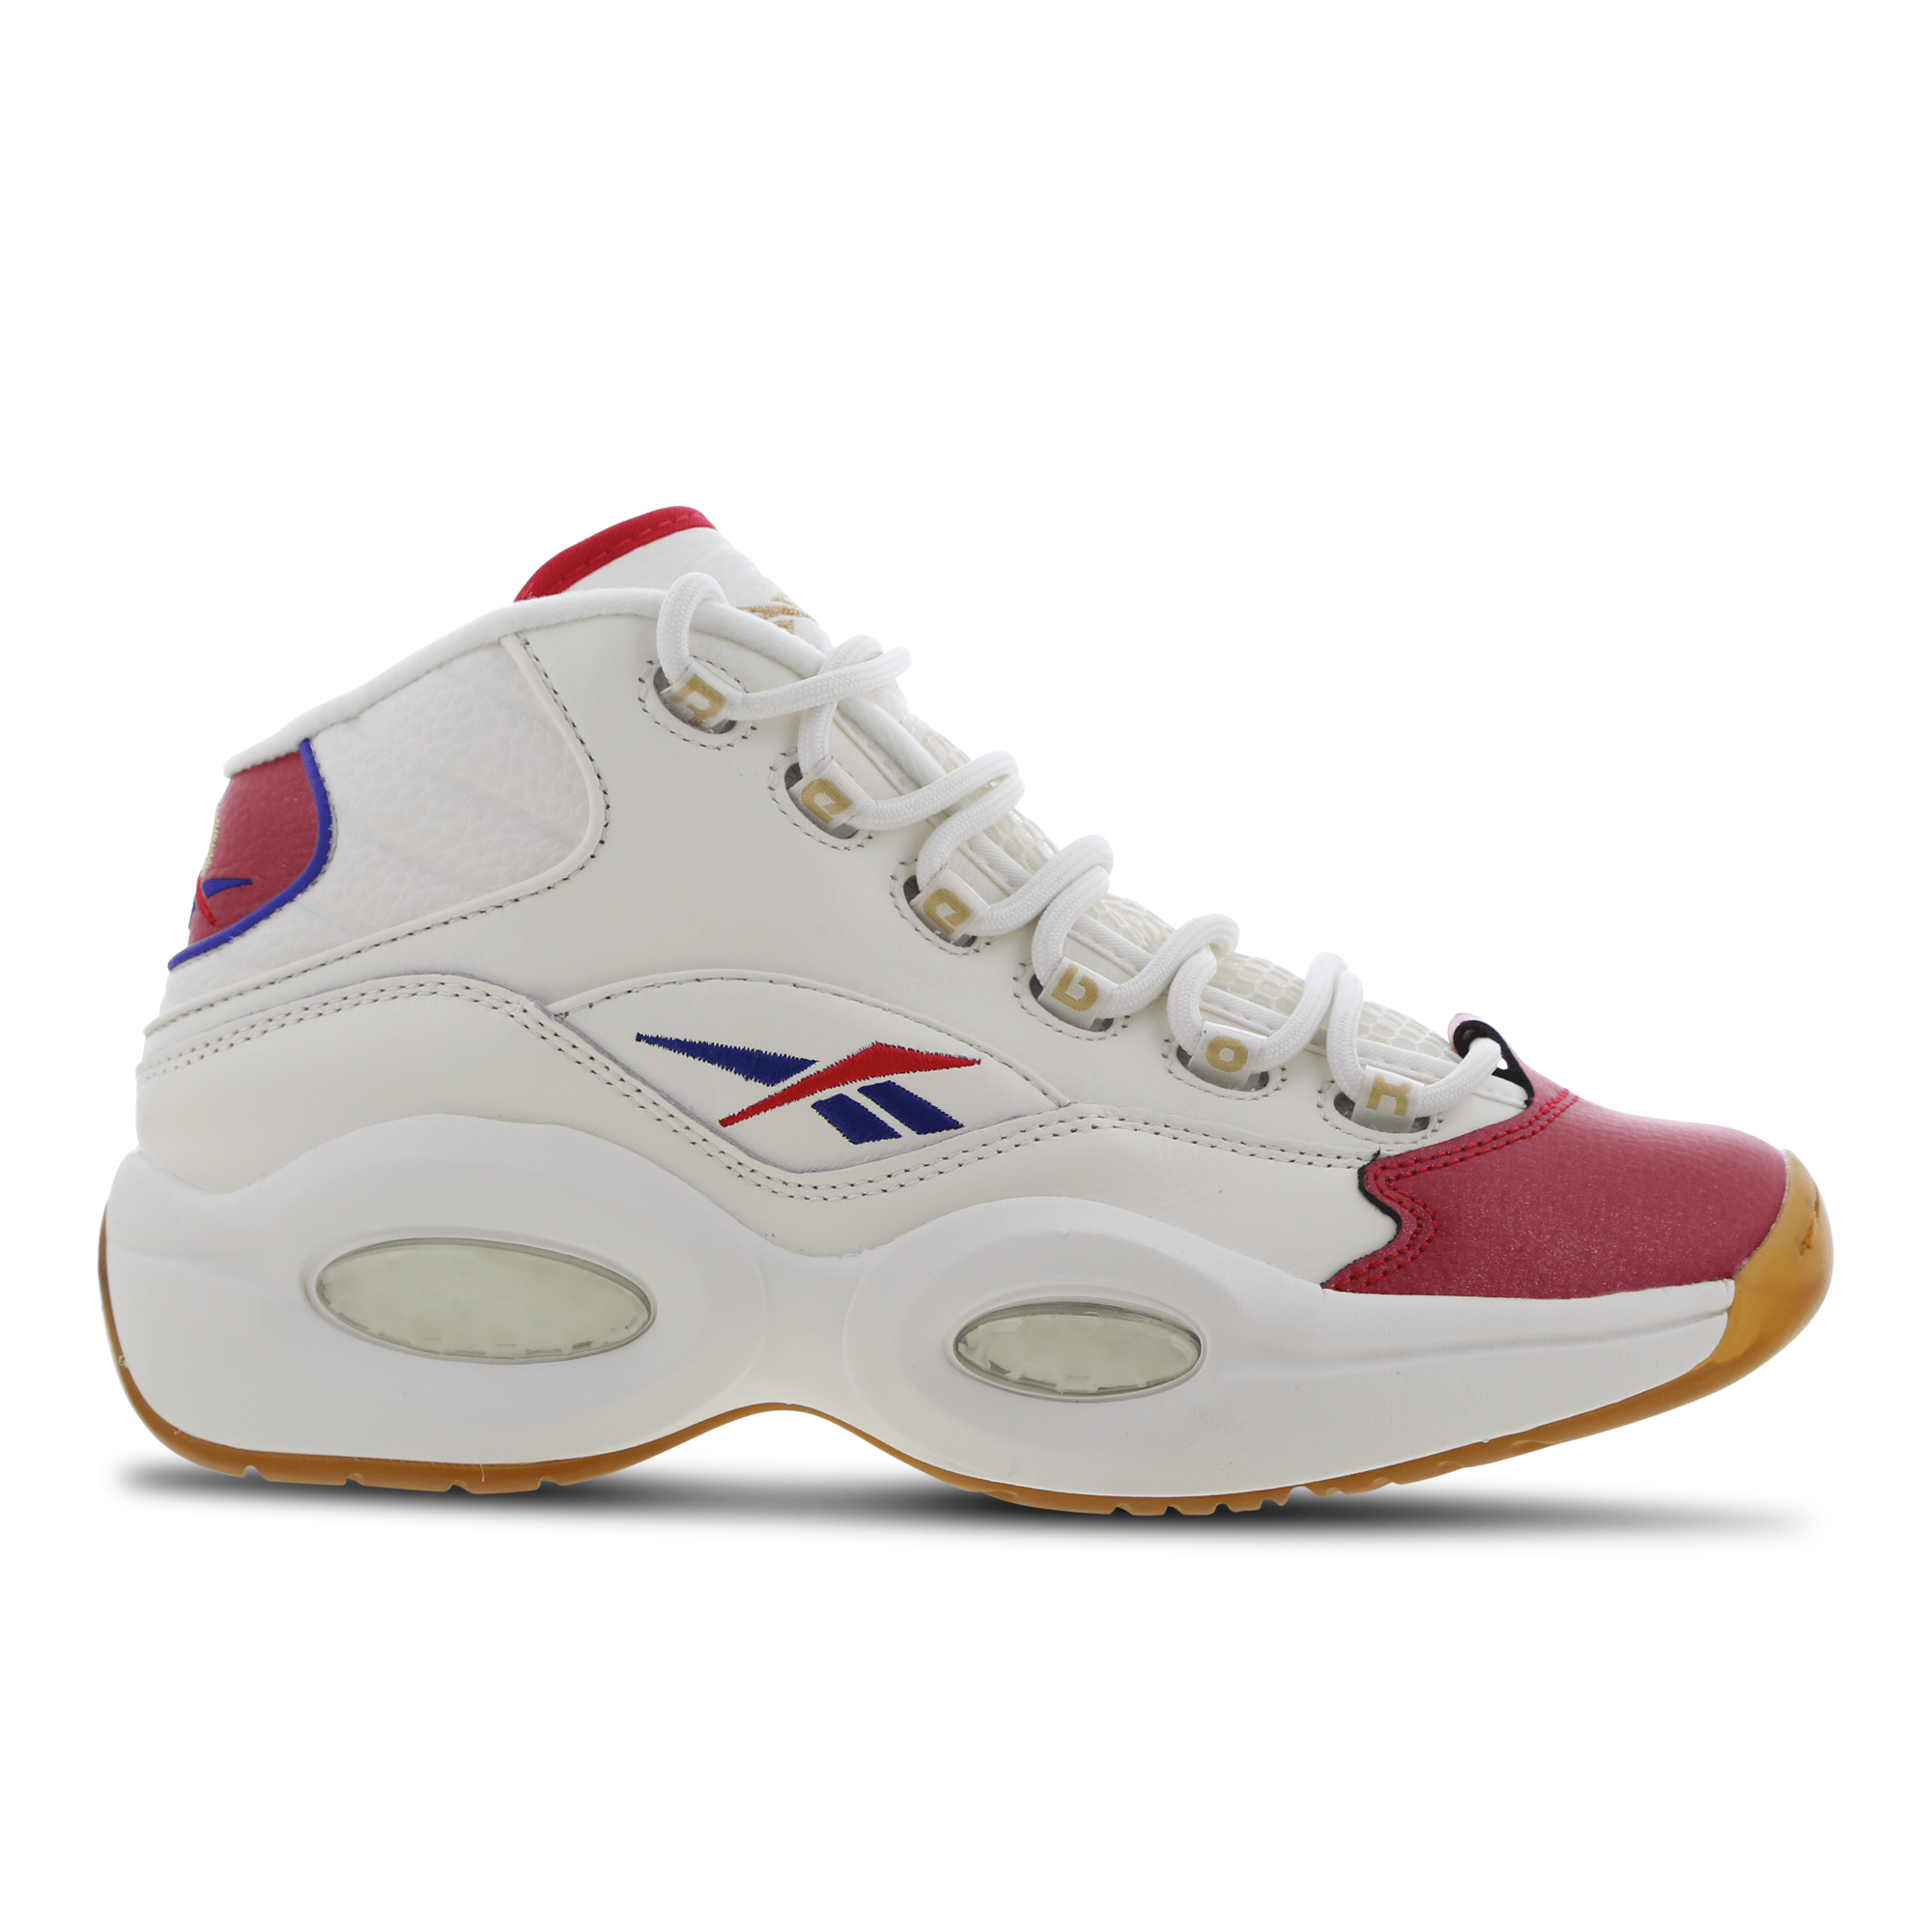 Reebok Red Toe Shoes